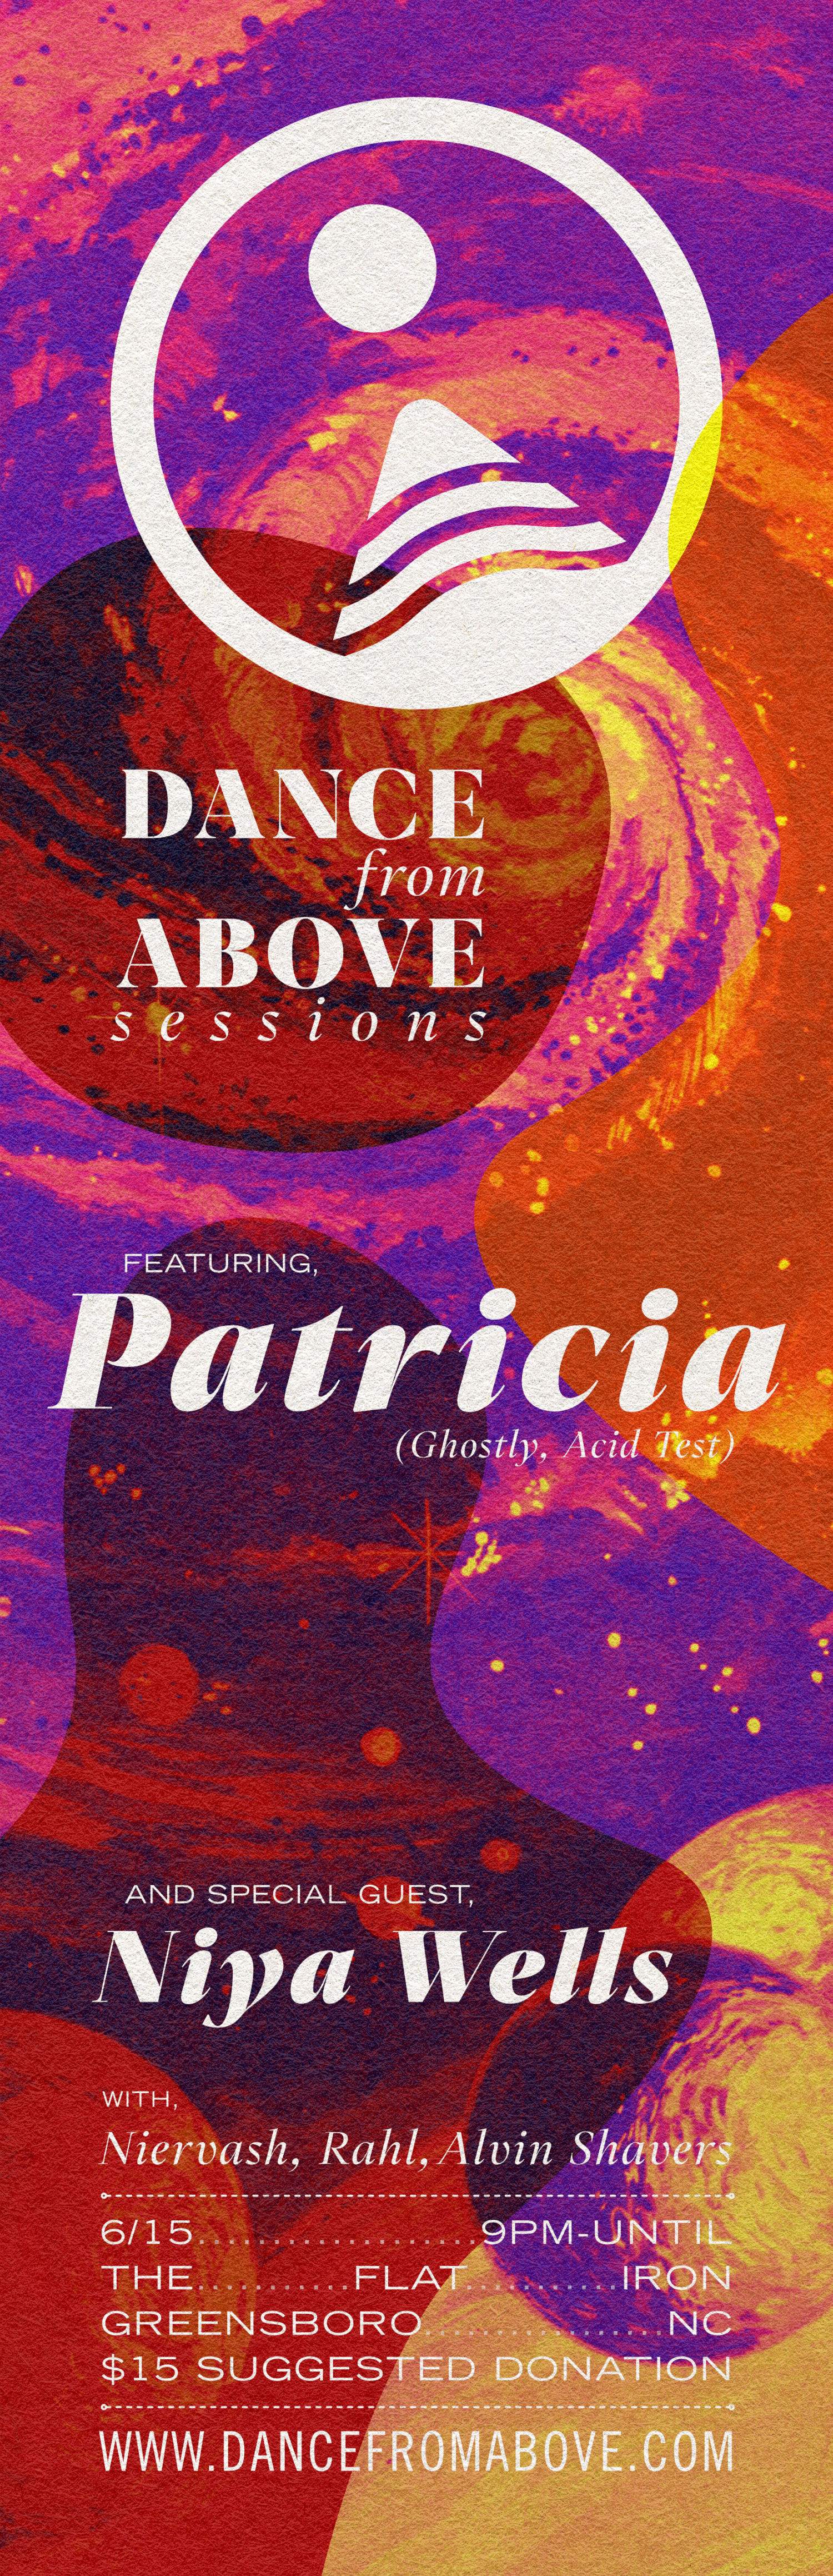 Dance From Above Sessions Featuring: Patricia + Special Guest: Niya Wells - フライヤー表